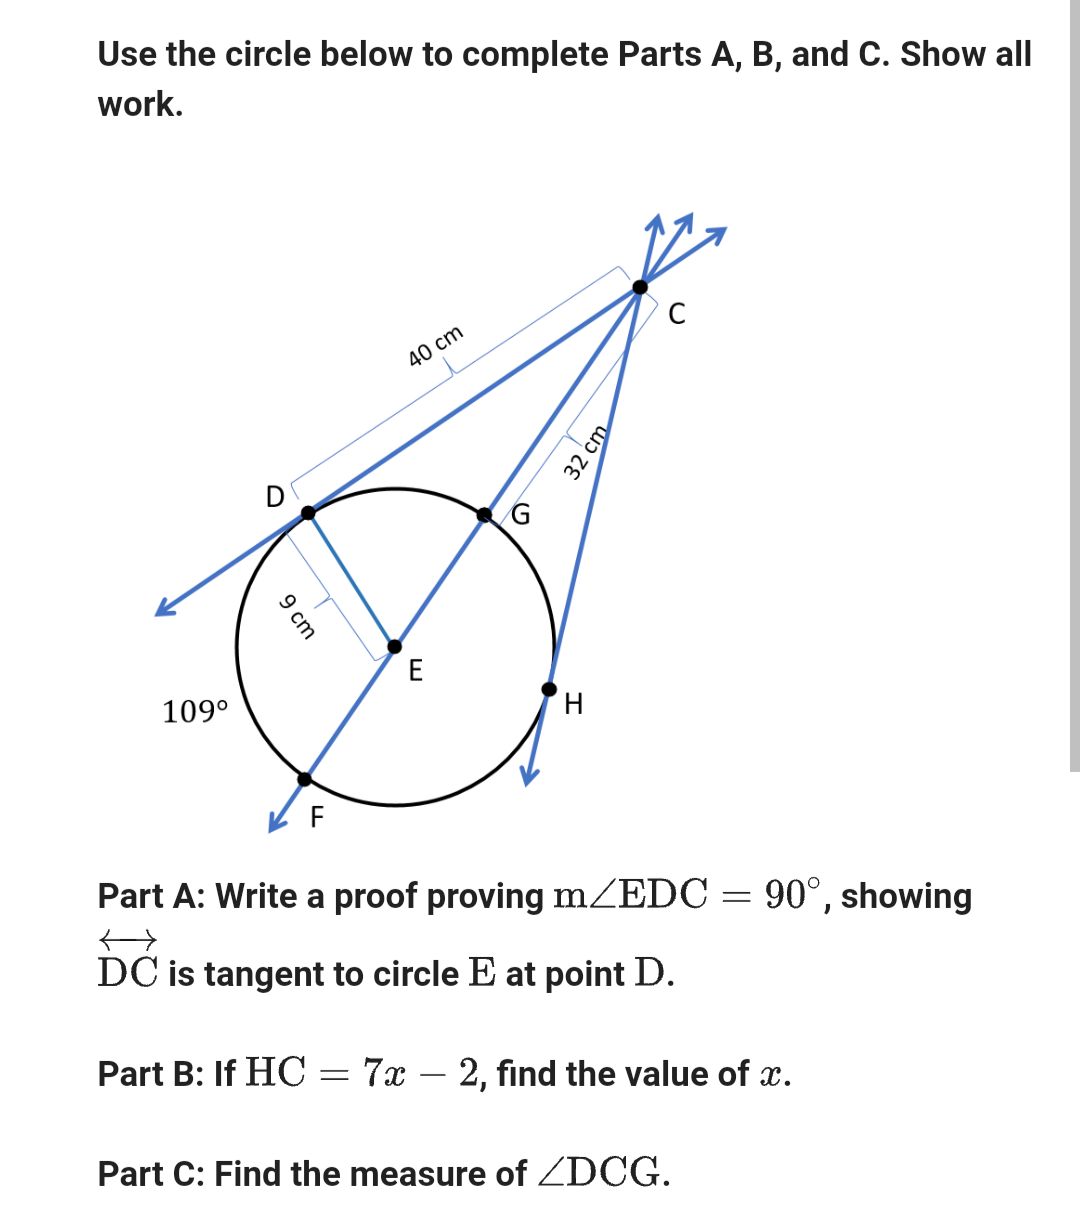 Use the circle below to complete Parts A, B, and C. Show all
work.
109⁰
9 cm
F
40 cm
E
G
H
32 cm
Part A: Write a proof proving m/EDC = 90°, showing
DC is tangent to circle E at point D.
Part B: If HC = 7x - 2, find the value of x.
Part C: Find the measure of <DCG.